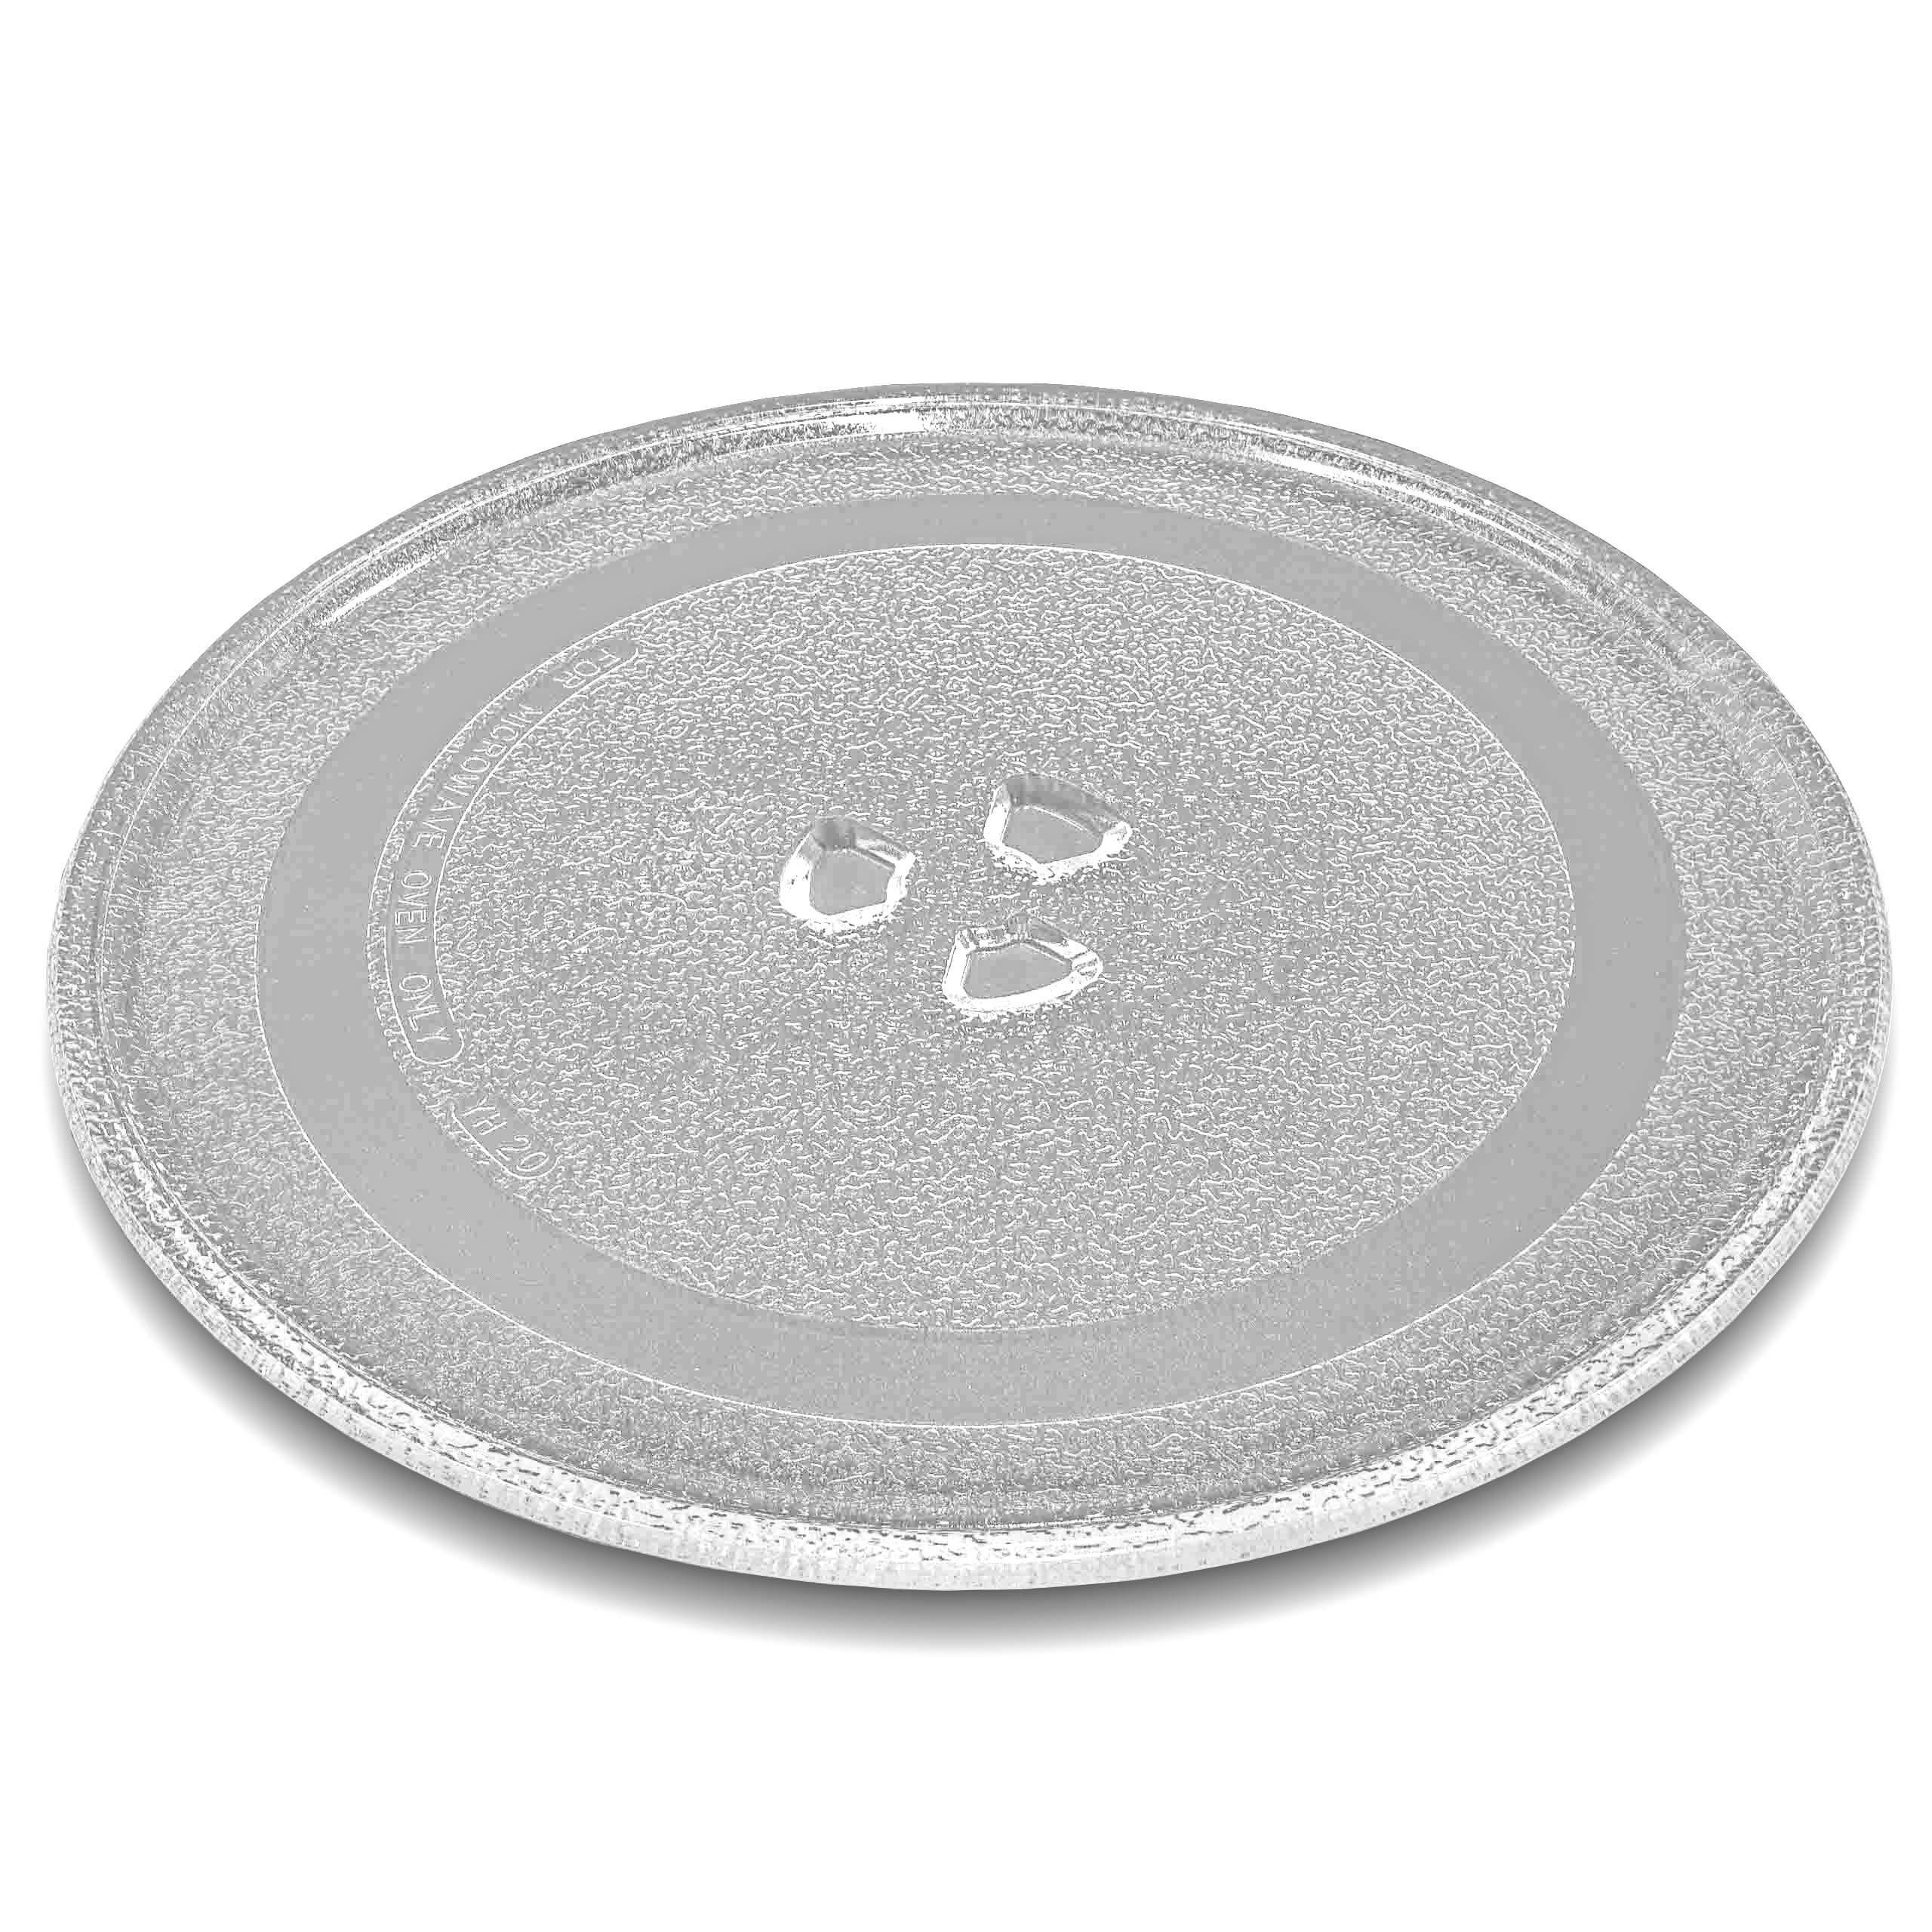 glass microwave plate, rotary plate 24.5cm replaces Panasonic Z06016D00XN for Silvercrest microwave etc